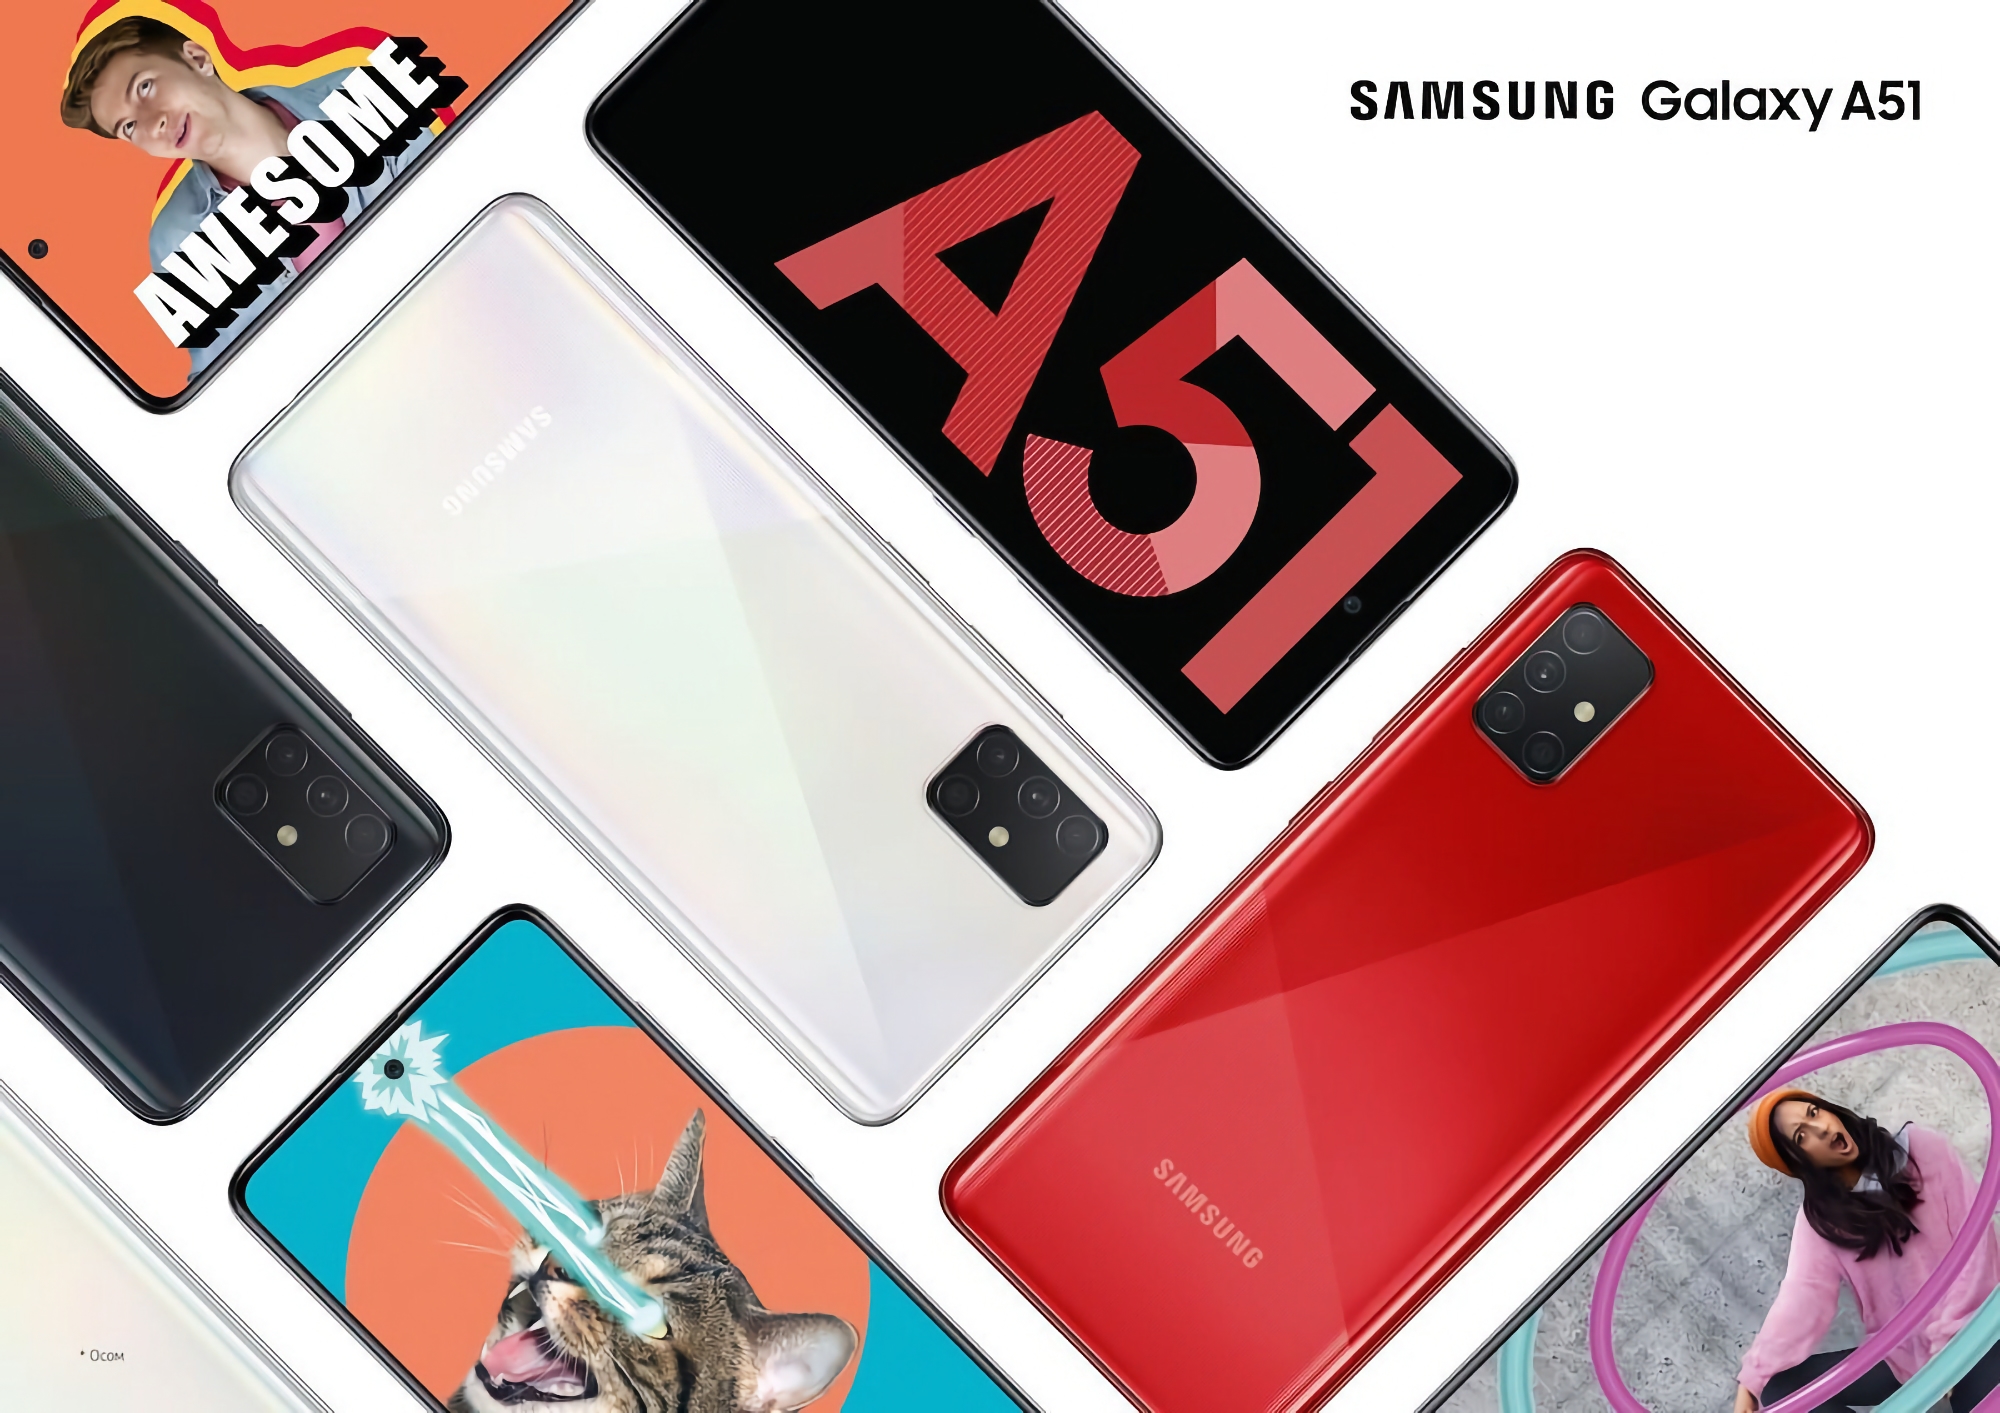 Samsung started updating Galaxy A51 to Android 13 with One UI 5.0 in Europe